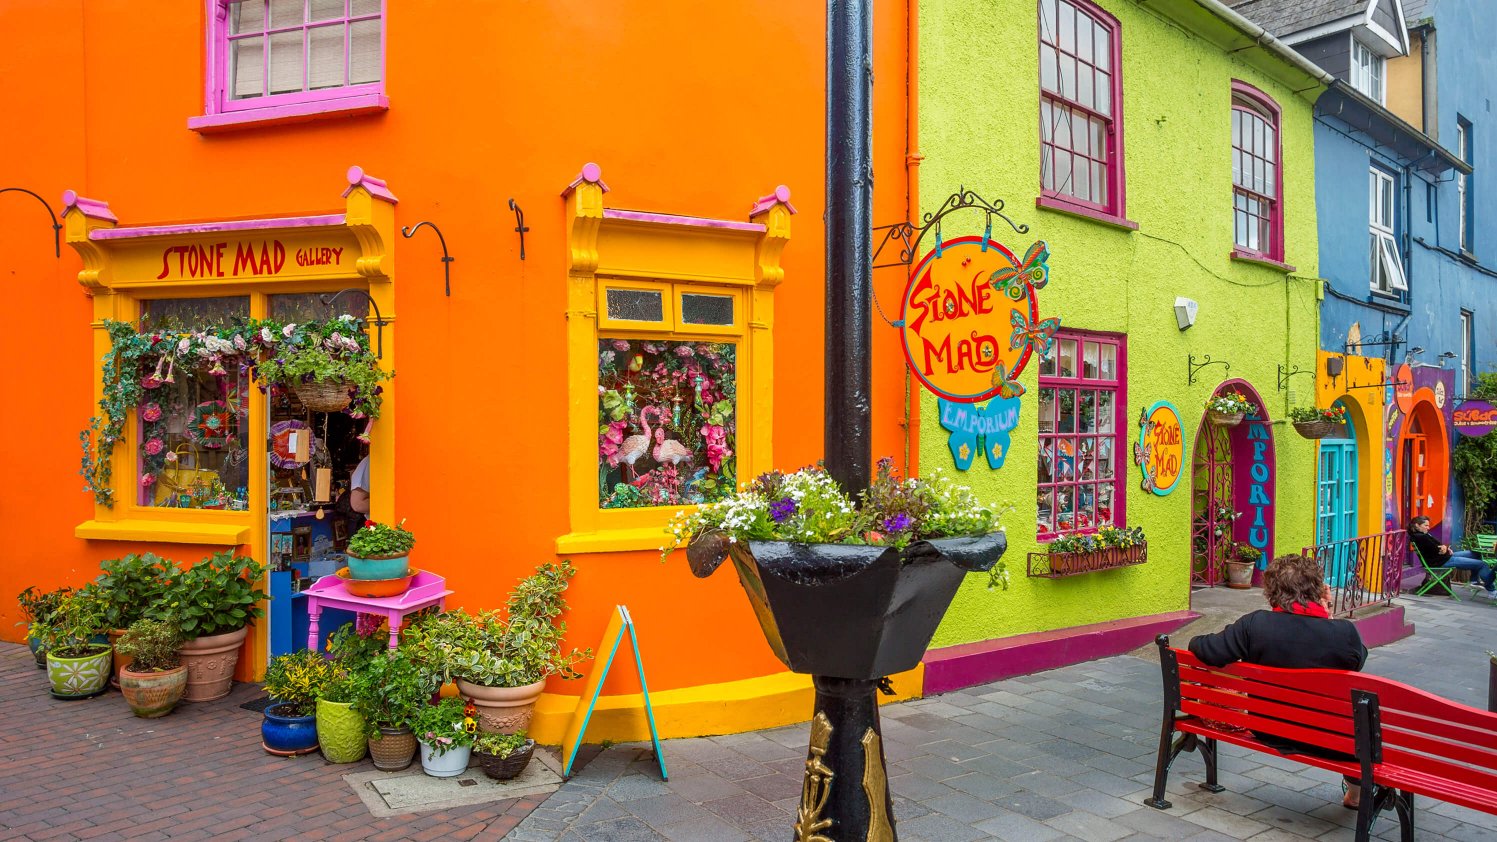 Colourful shop fronts on the streets of Kinsale